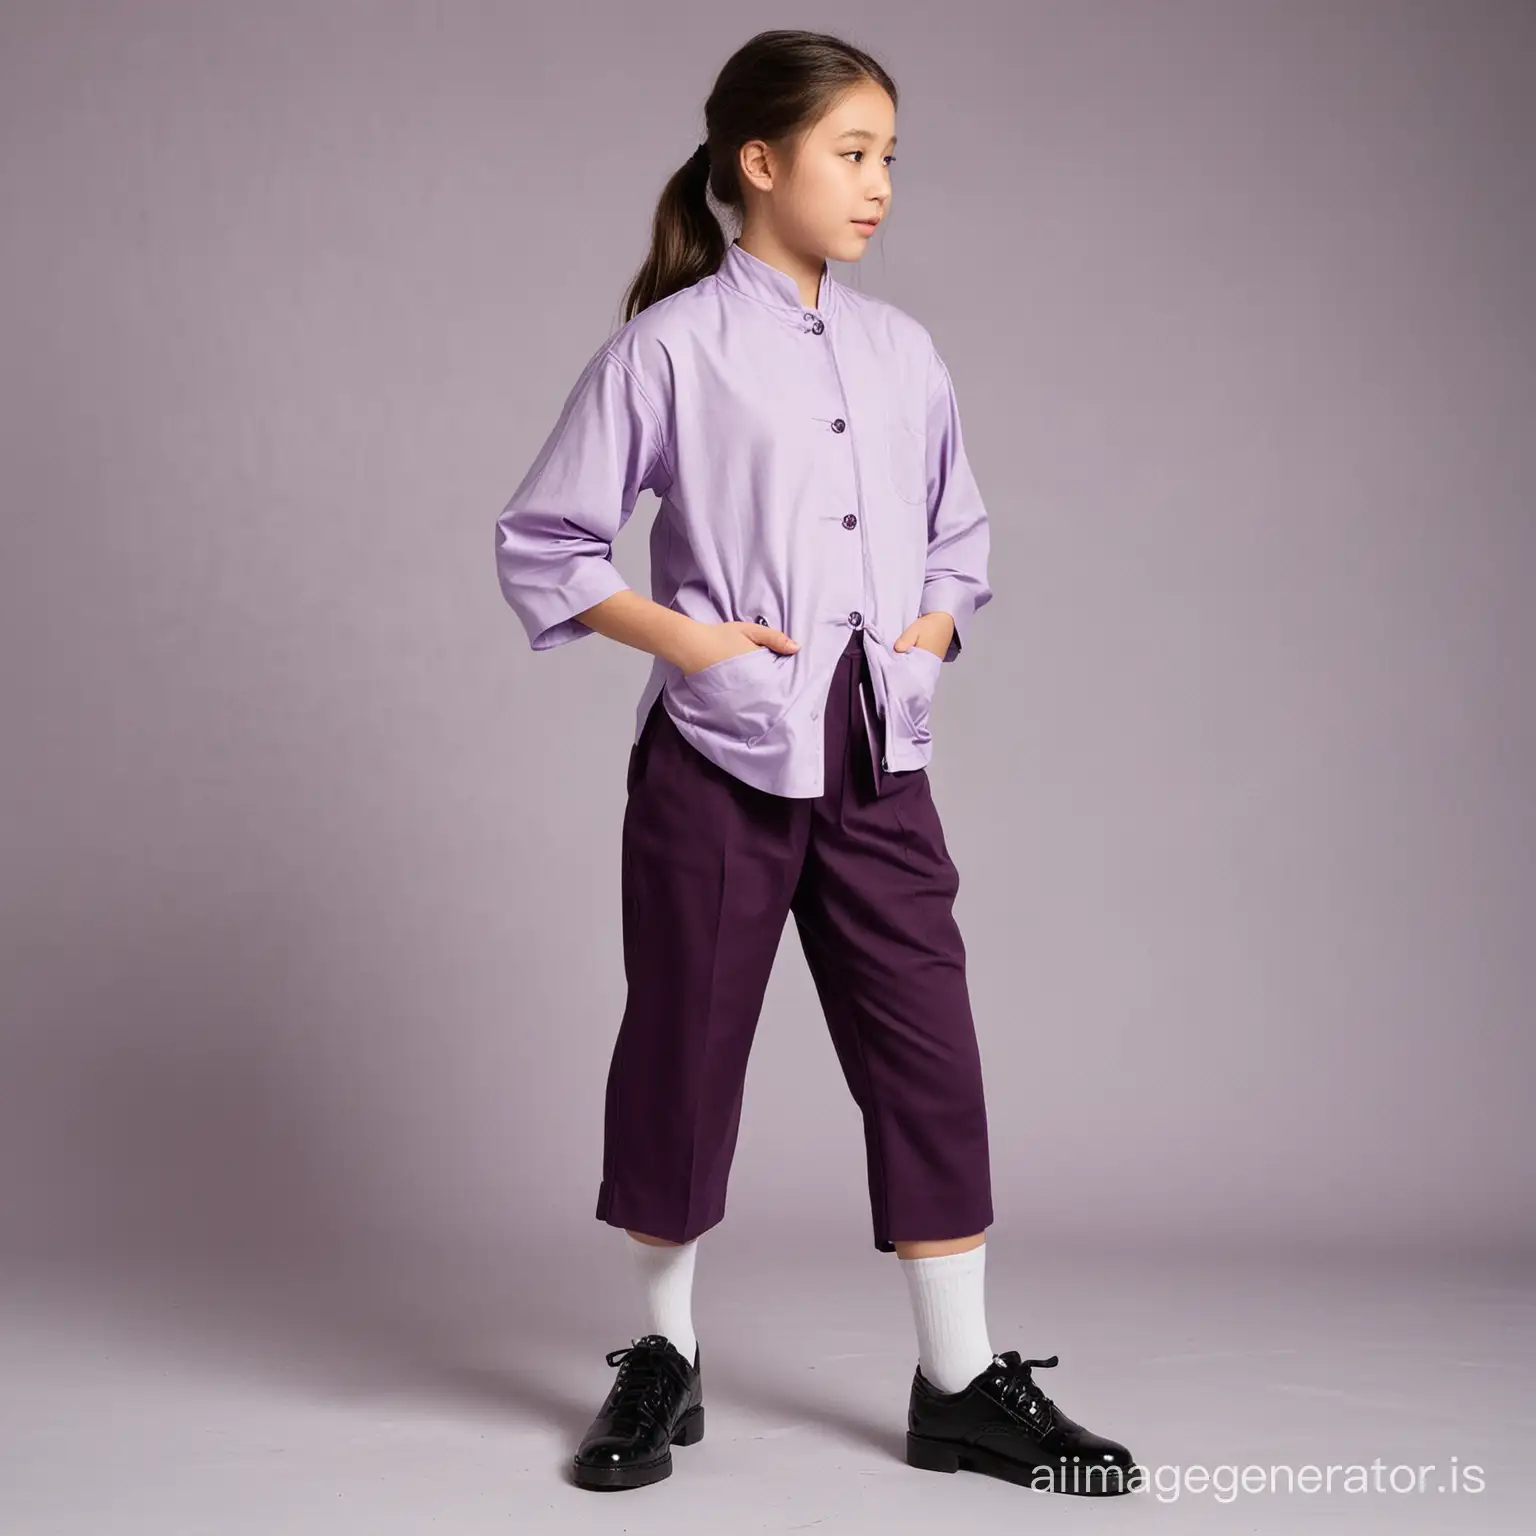 A 15 year old girl standing in a long shot. She is facing camera, wearing light lavender half sleeve shirt with Chinese collar. Her hair is single lined ponytailed. She wears a dark grape colored school uniform jacket over the shirt. She wears dark grape colored full length pants. She has black cut shoes on her foot and white socks.